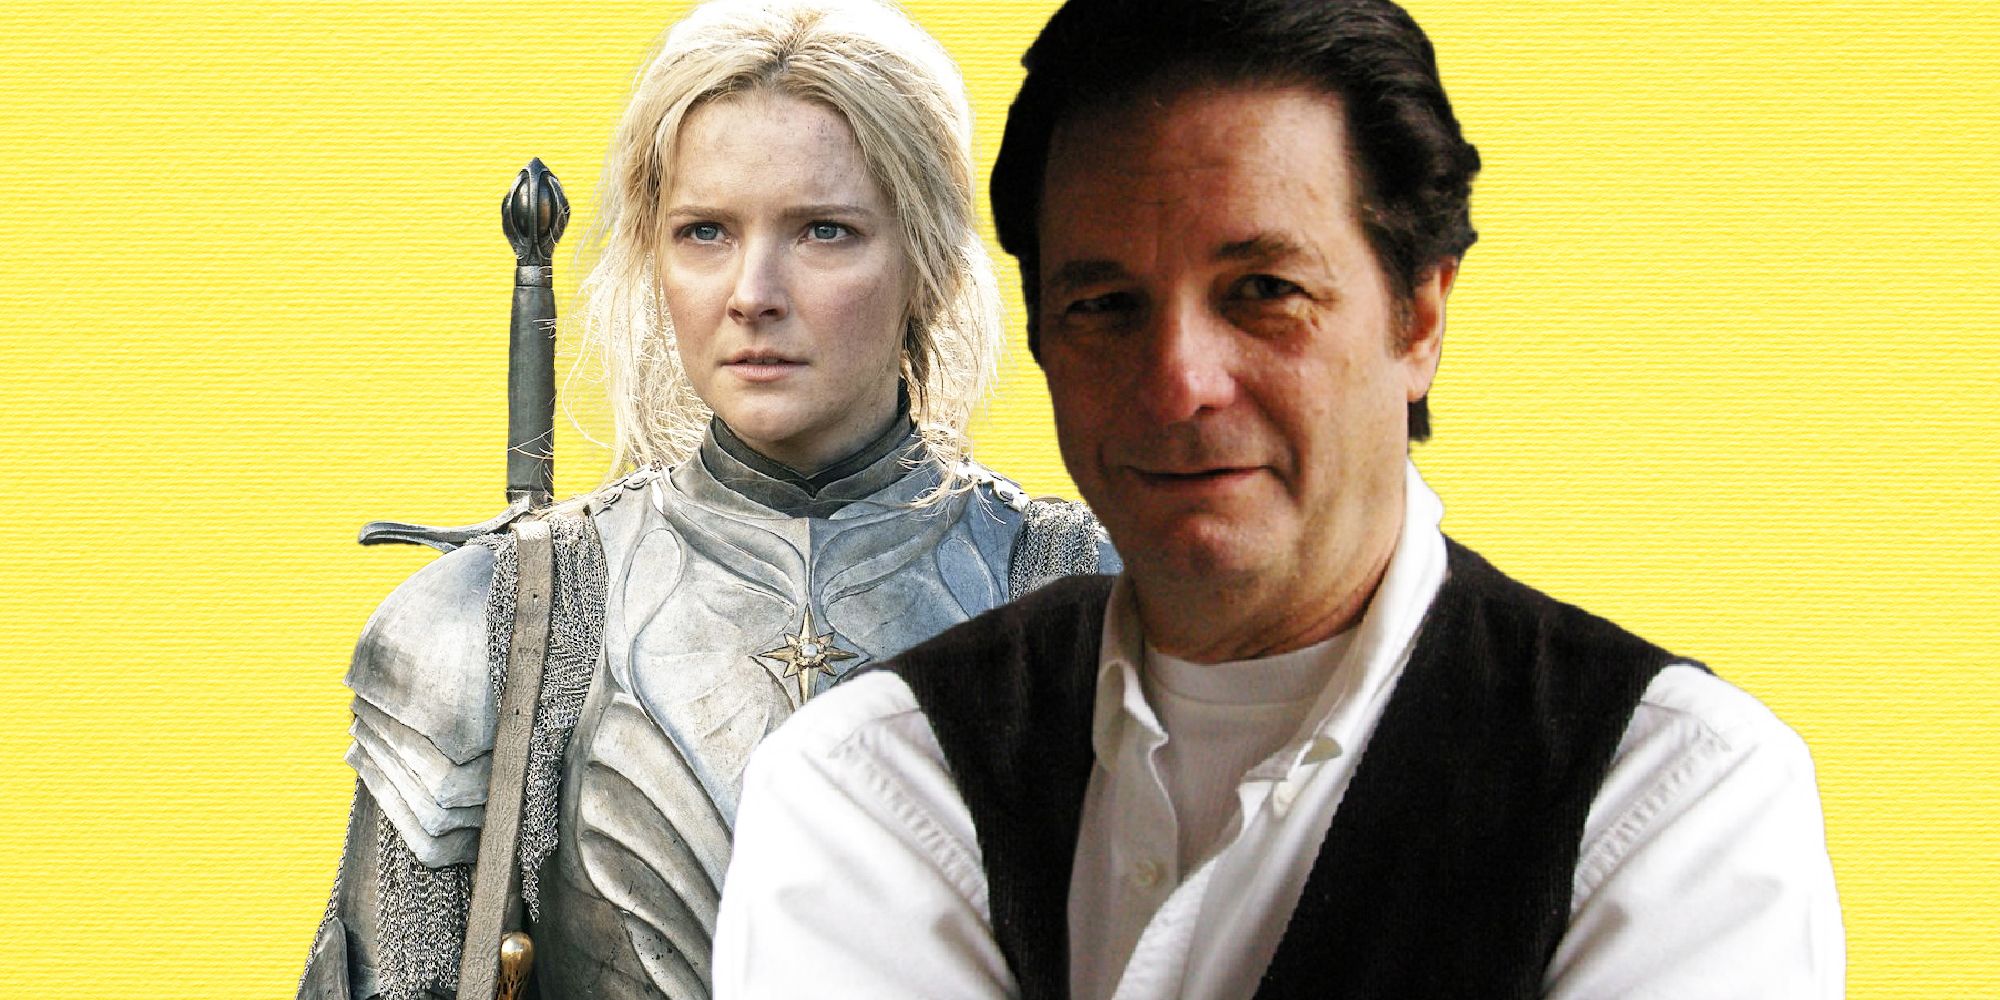 David Day and Galadriel from The Rings of Power